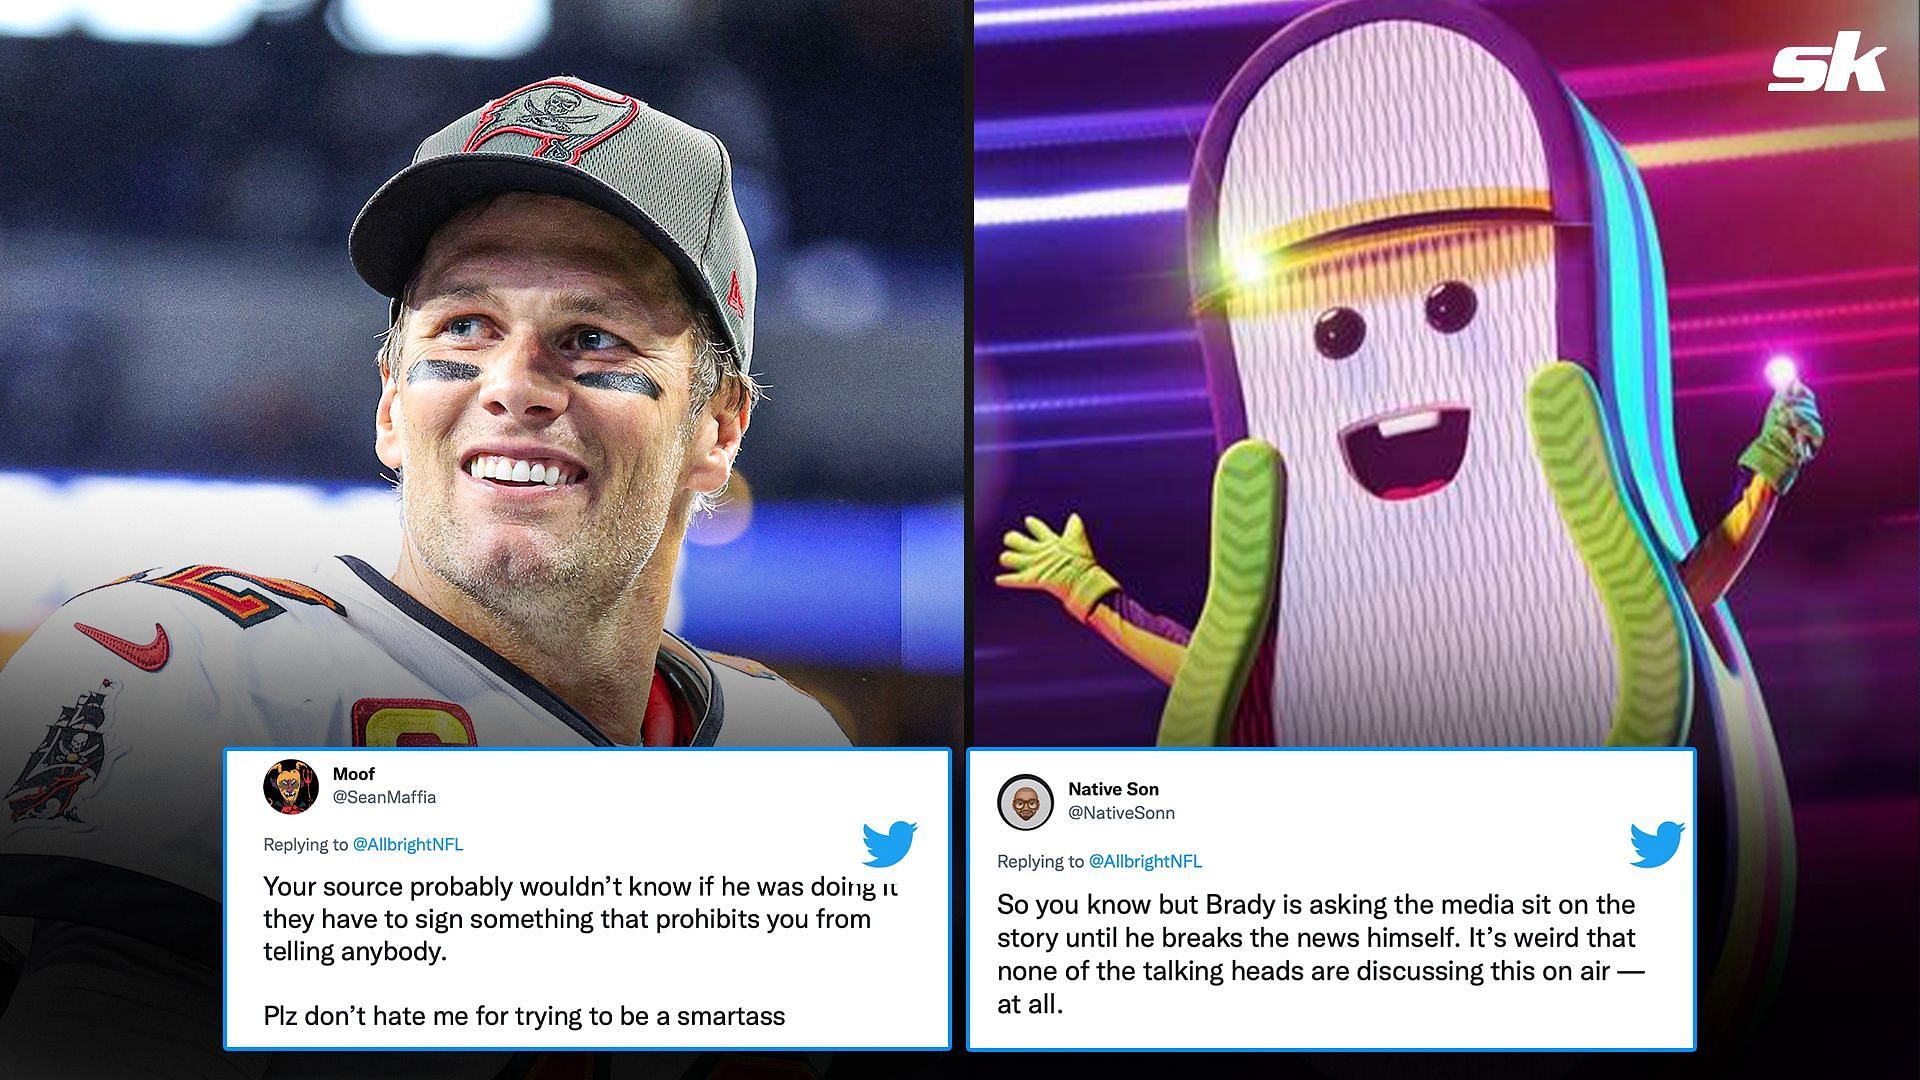 Is Tom Brady secretly appearing on The Masked Singer?